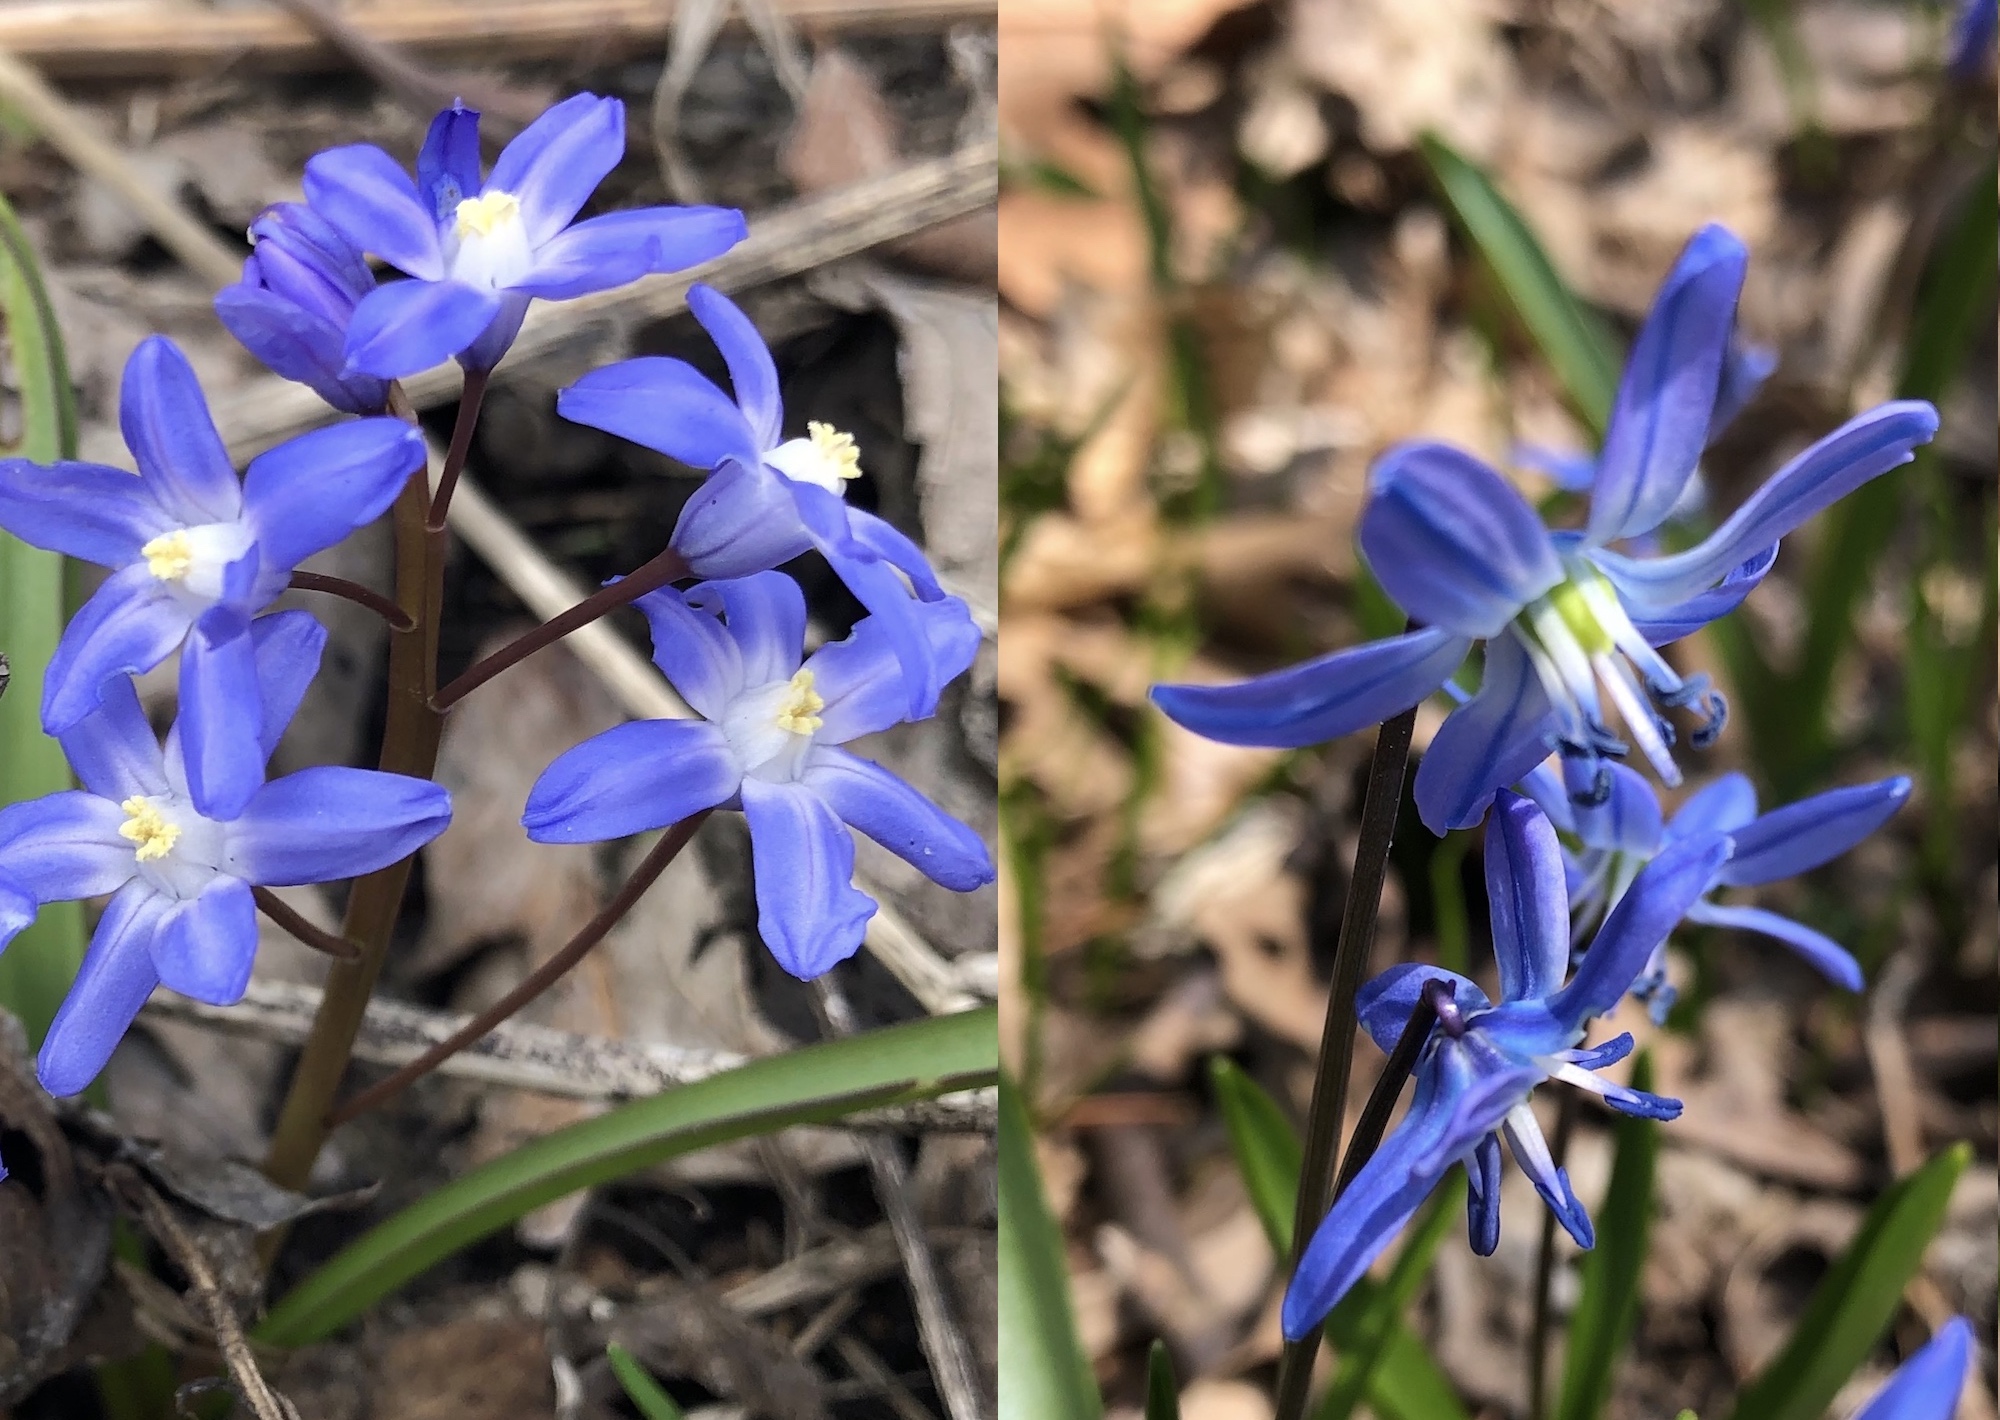 Glory-of-the-Snow and Siberian Squill comparison.